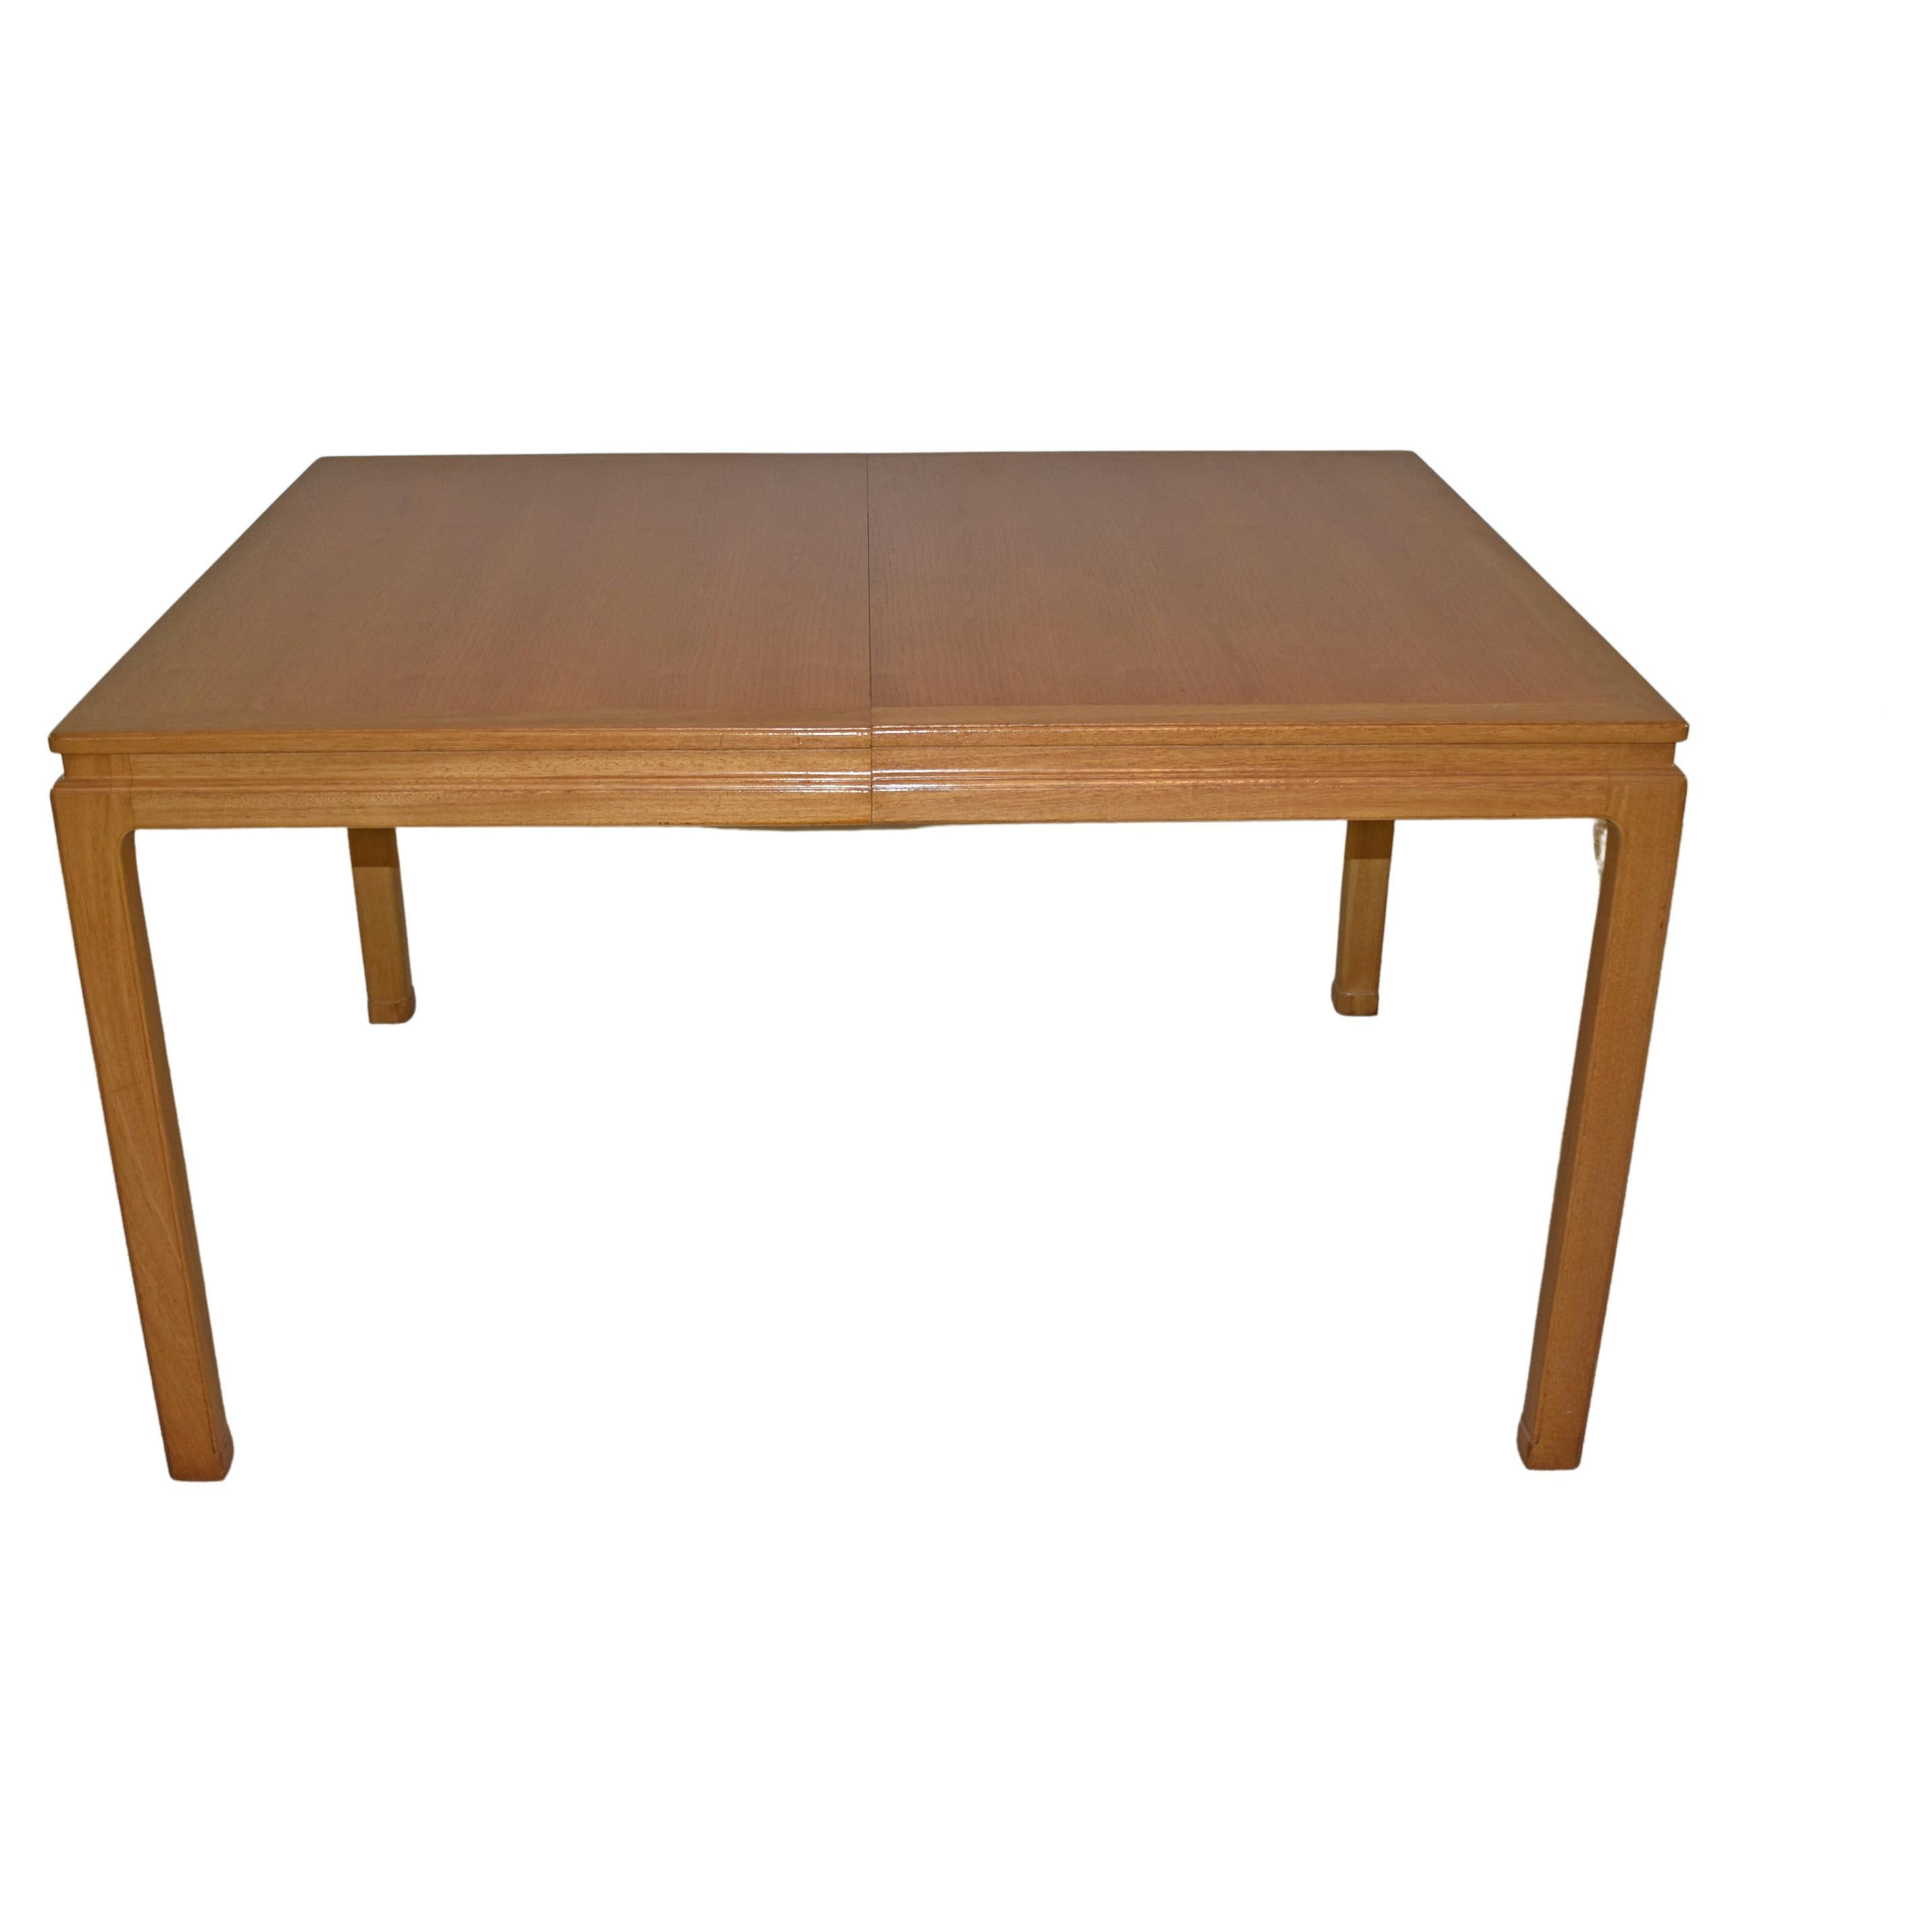 Mahogany Dining Table with Two Leaves by Edward Wormley for Dunbar